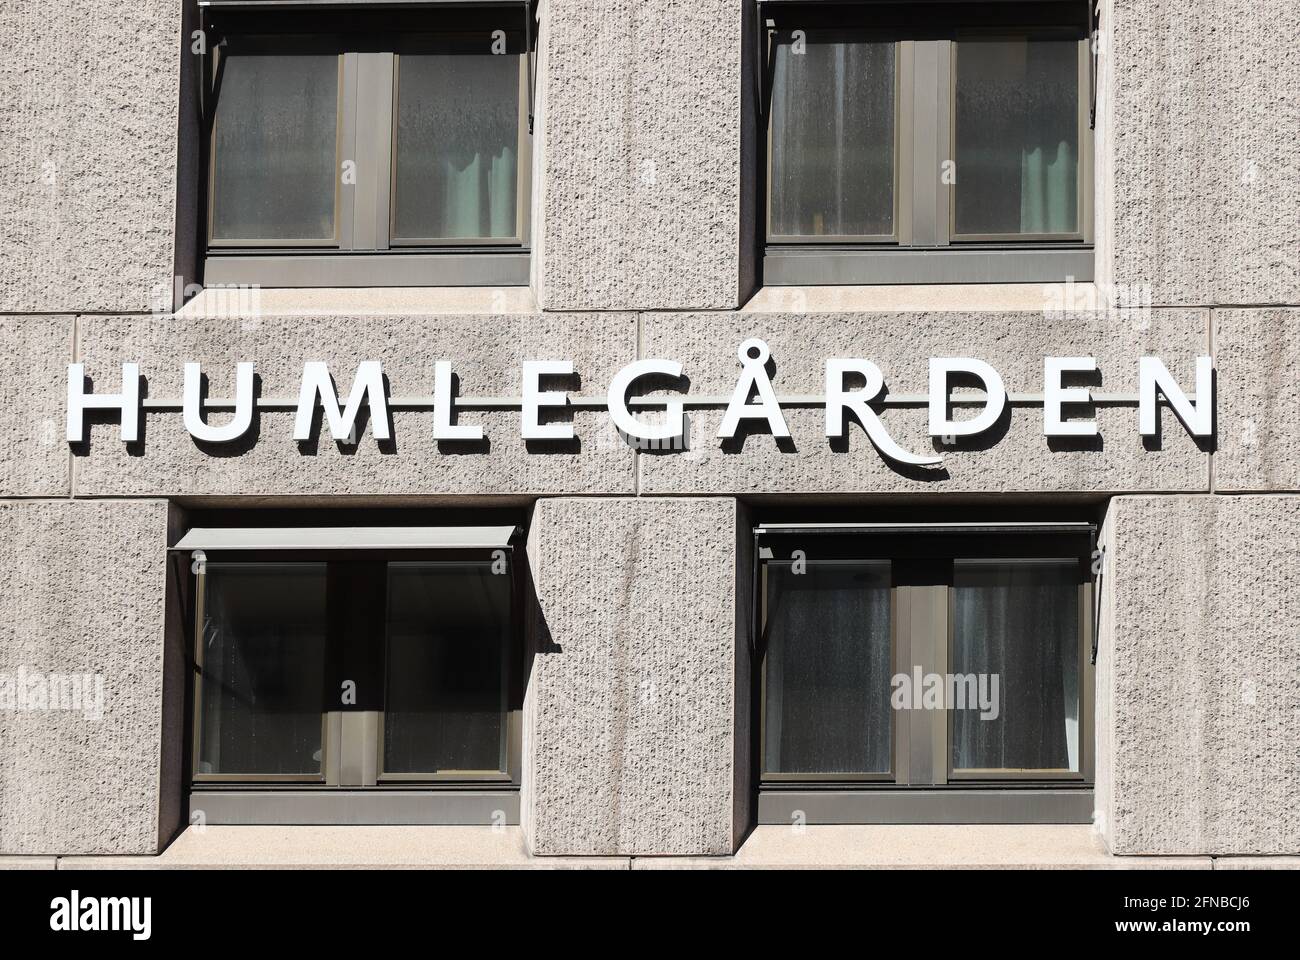 Stockholm, Sweden - May 12, 2021: The Humlegarden property owner advertising sign and logotype at the Kungsgatan street. Stock Photo